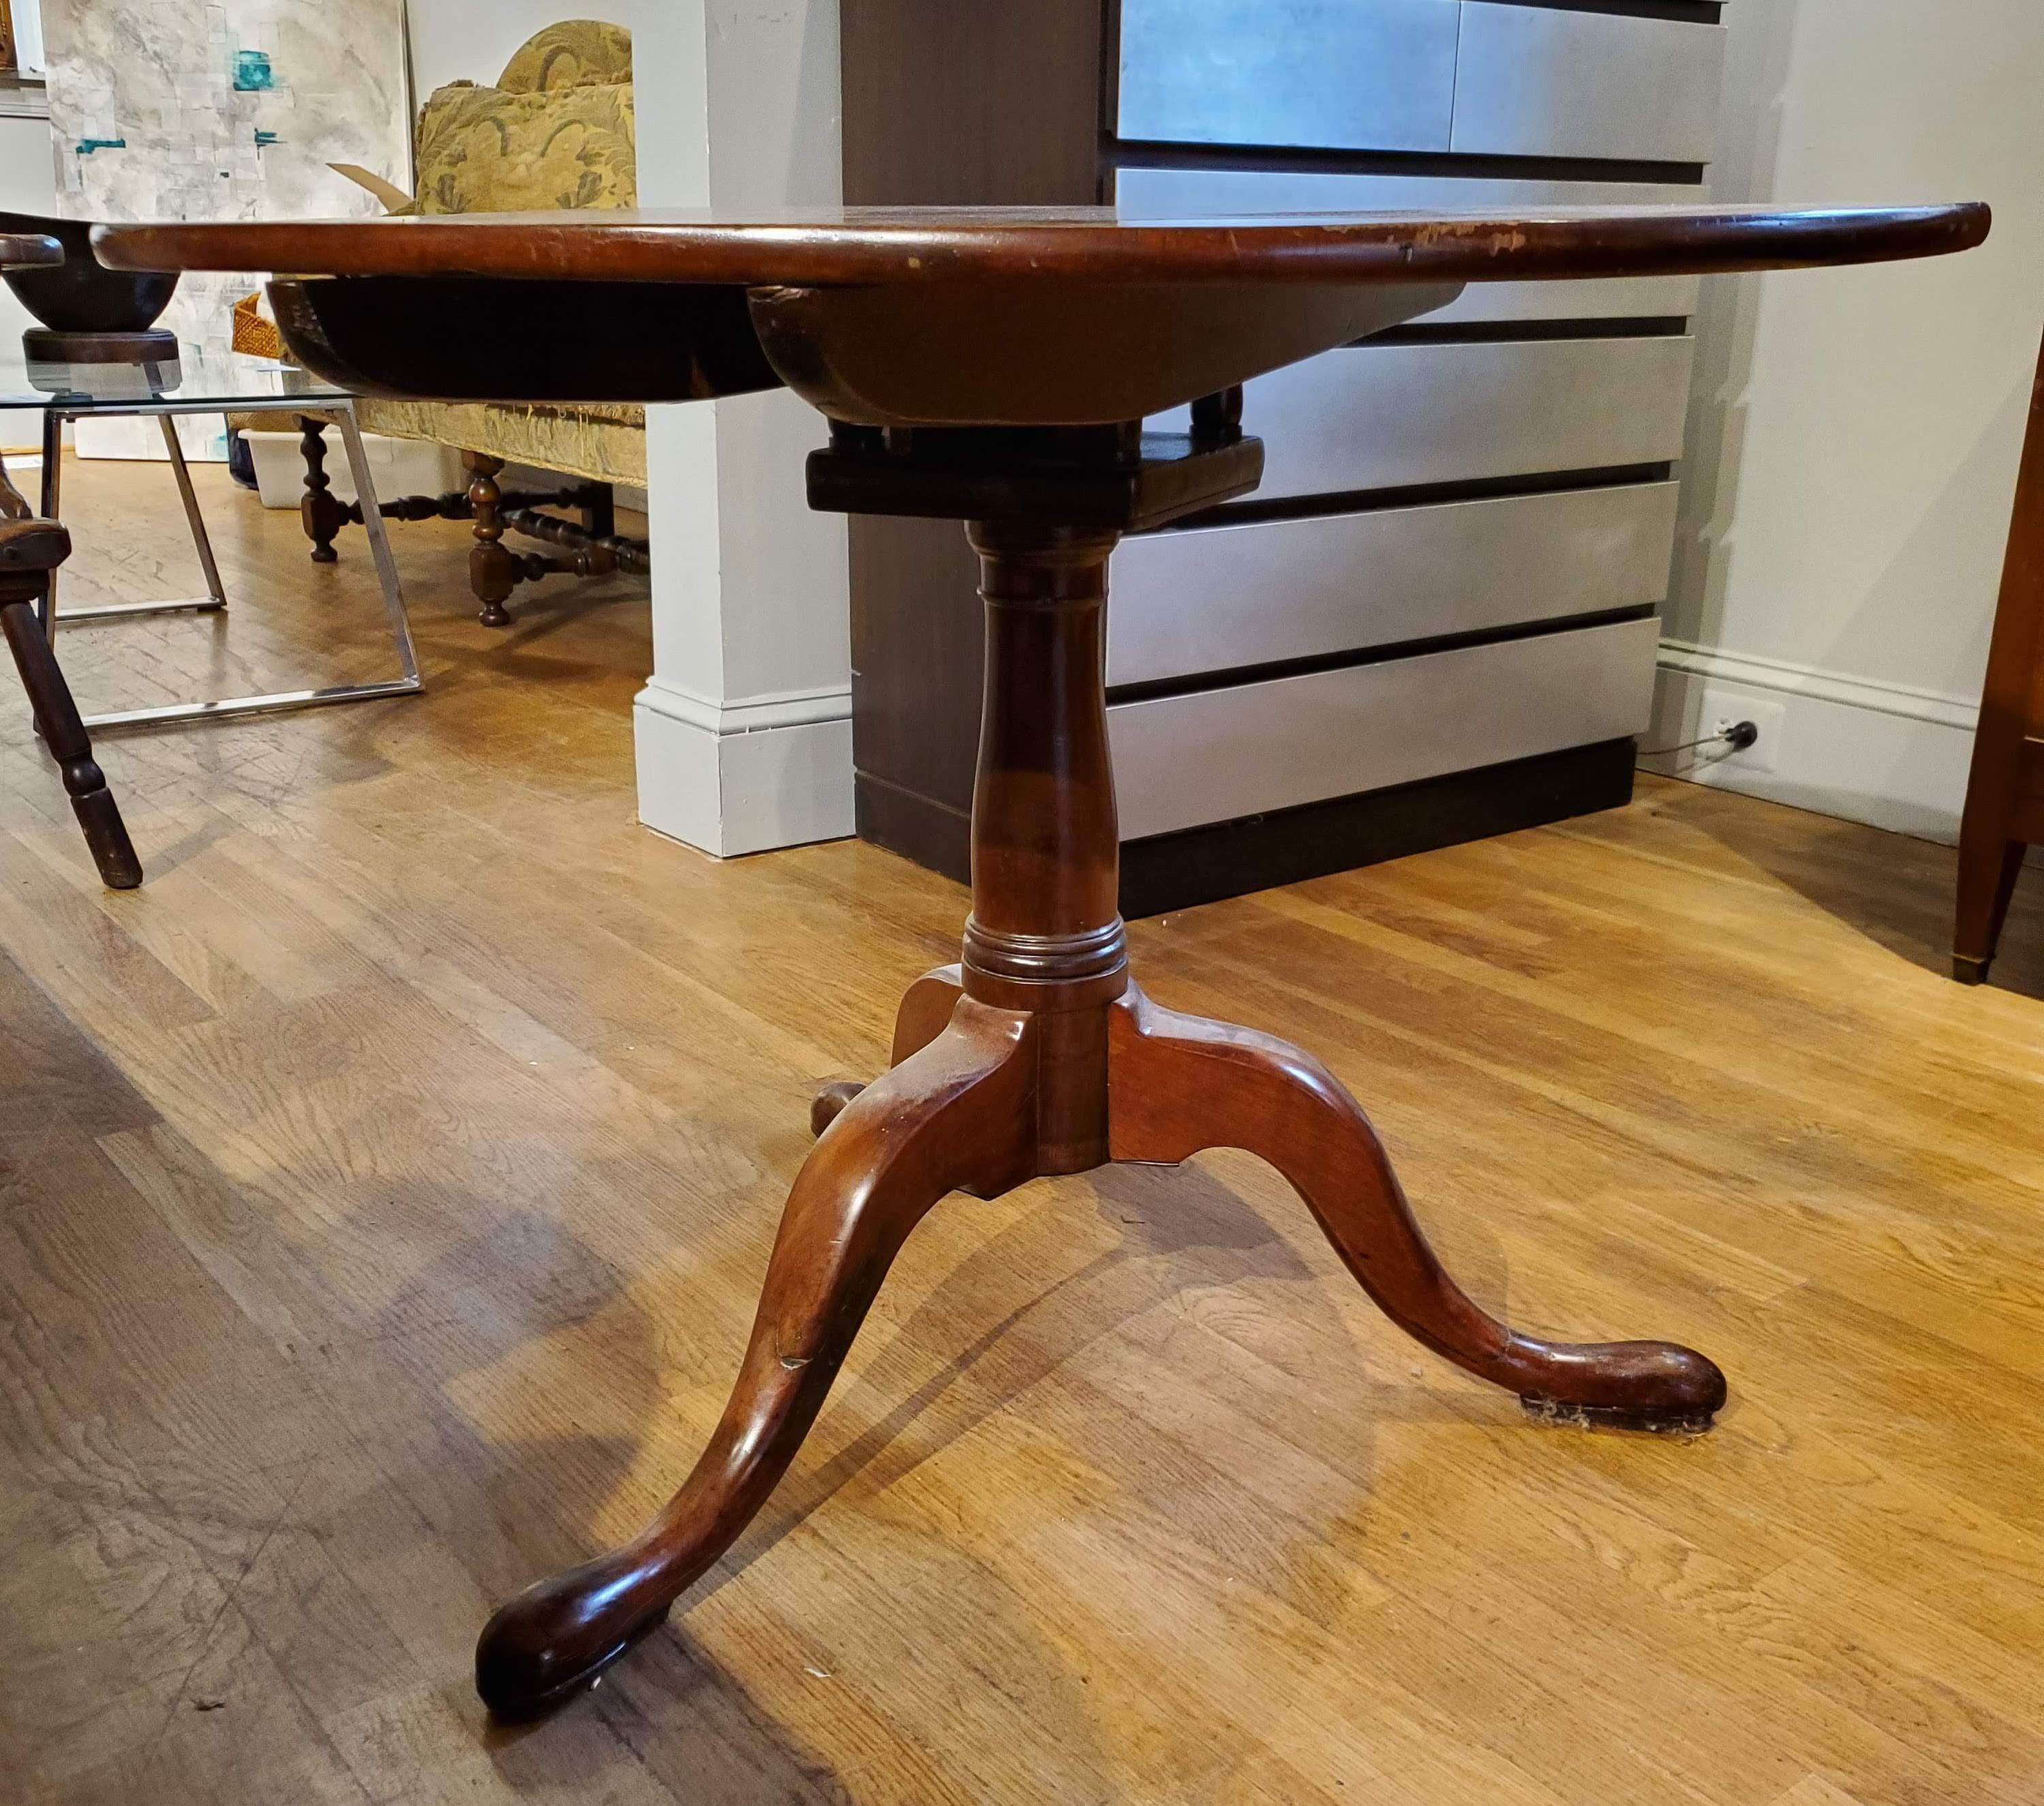 This 18th century Irish tilt-top tripod tea table is simply lovely. Made of darkly patinated Cuban mahogany with boxwood stringing and sycamore and satinwood inlaid floral decoration. Slipper feet, turned column and birdcage swivel mechanism makes